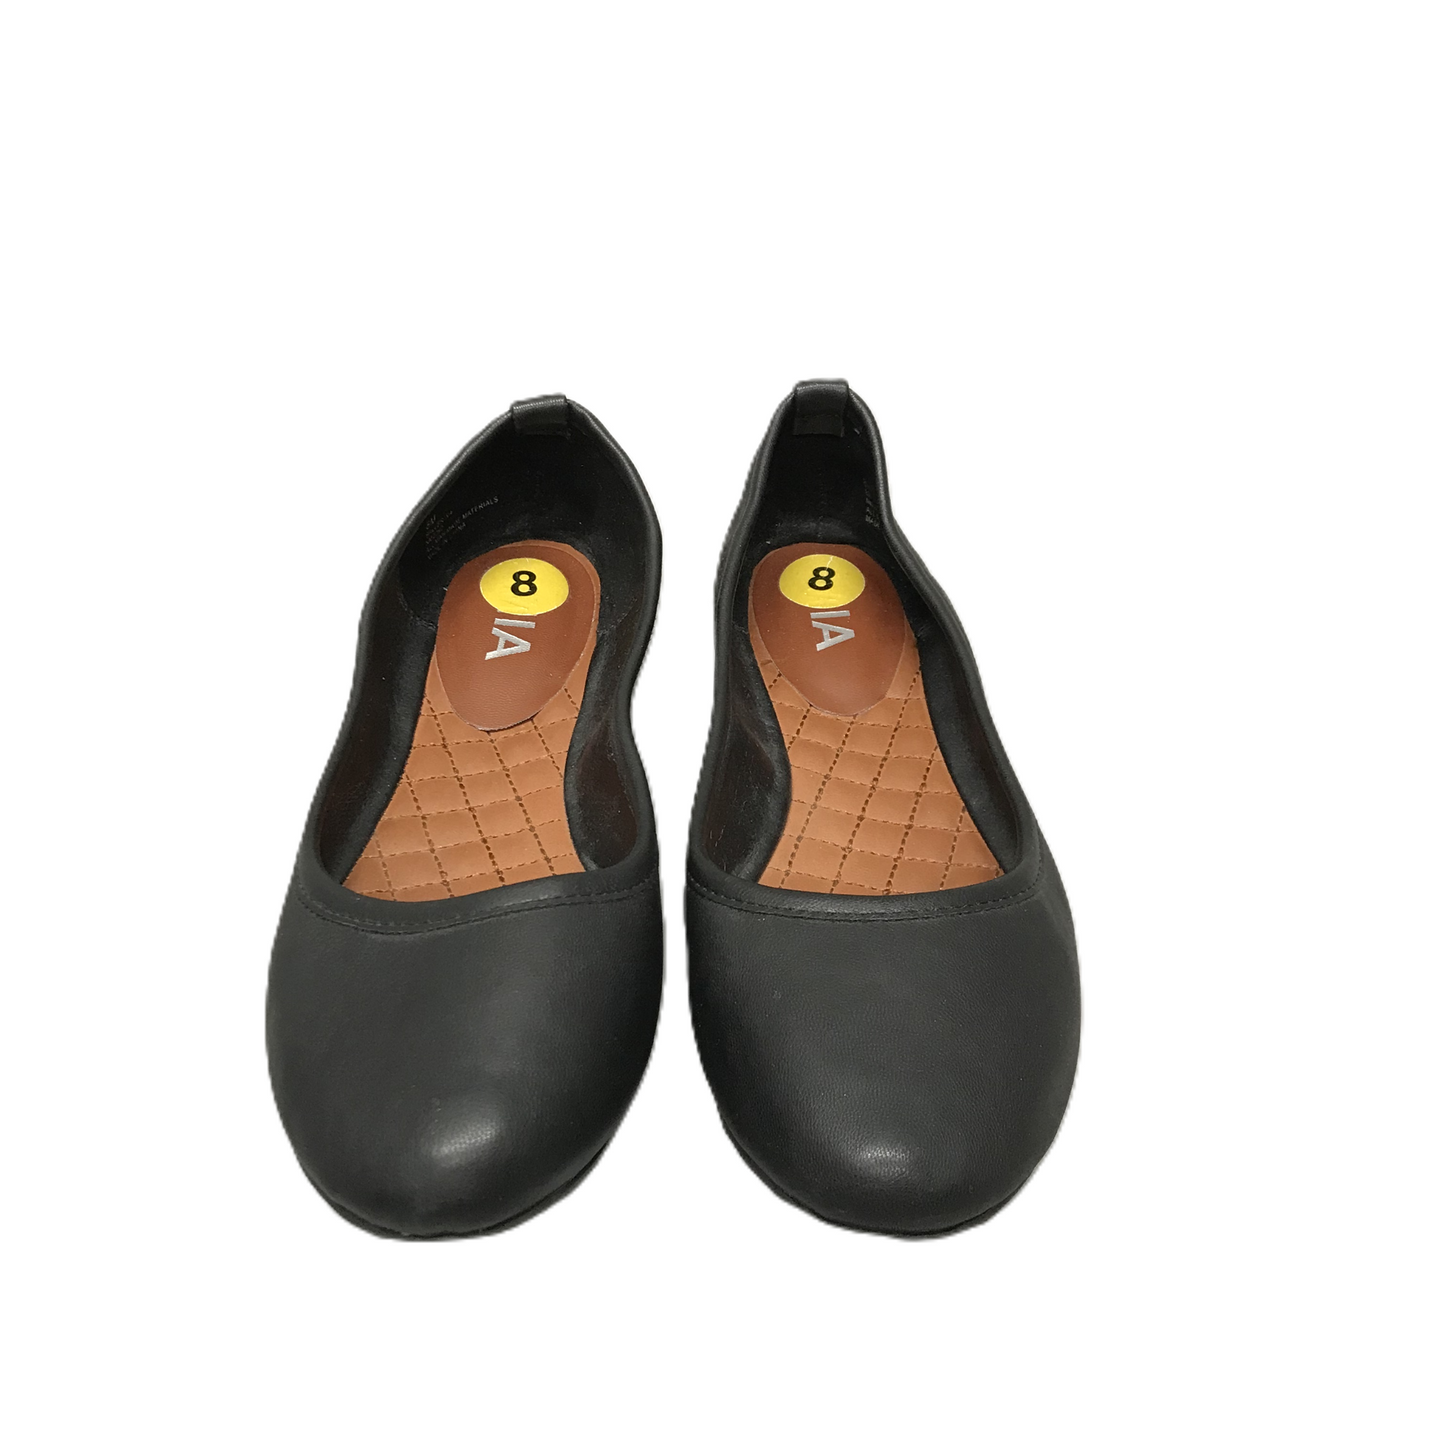 Black Shoes Flats By Mia, Size: 8